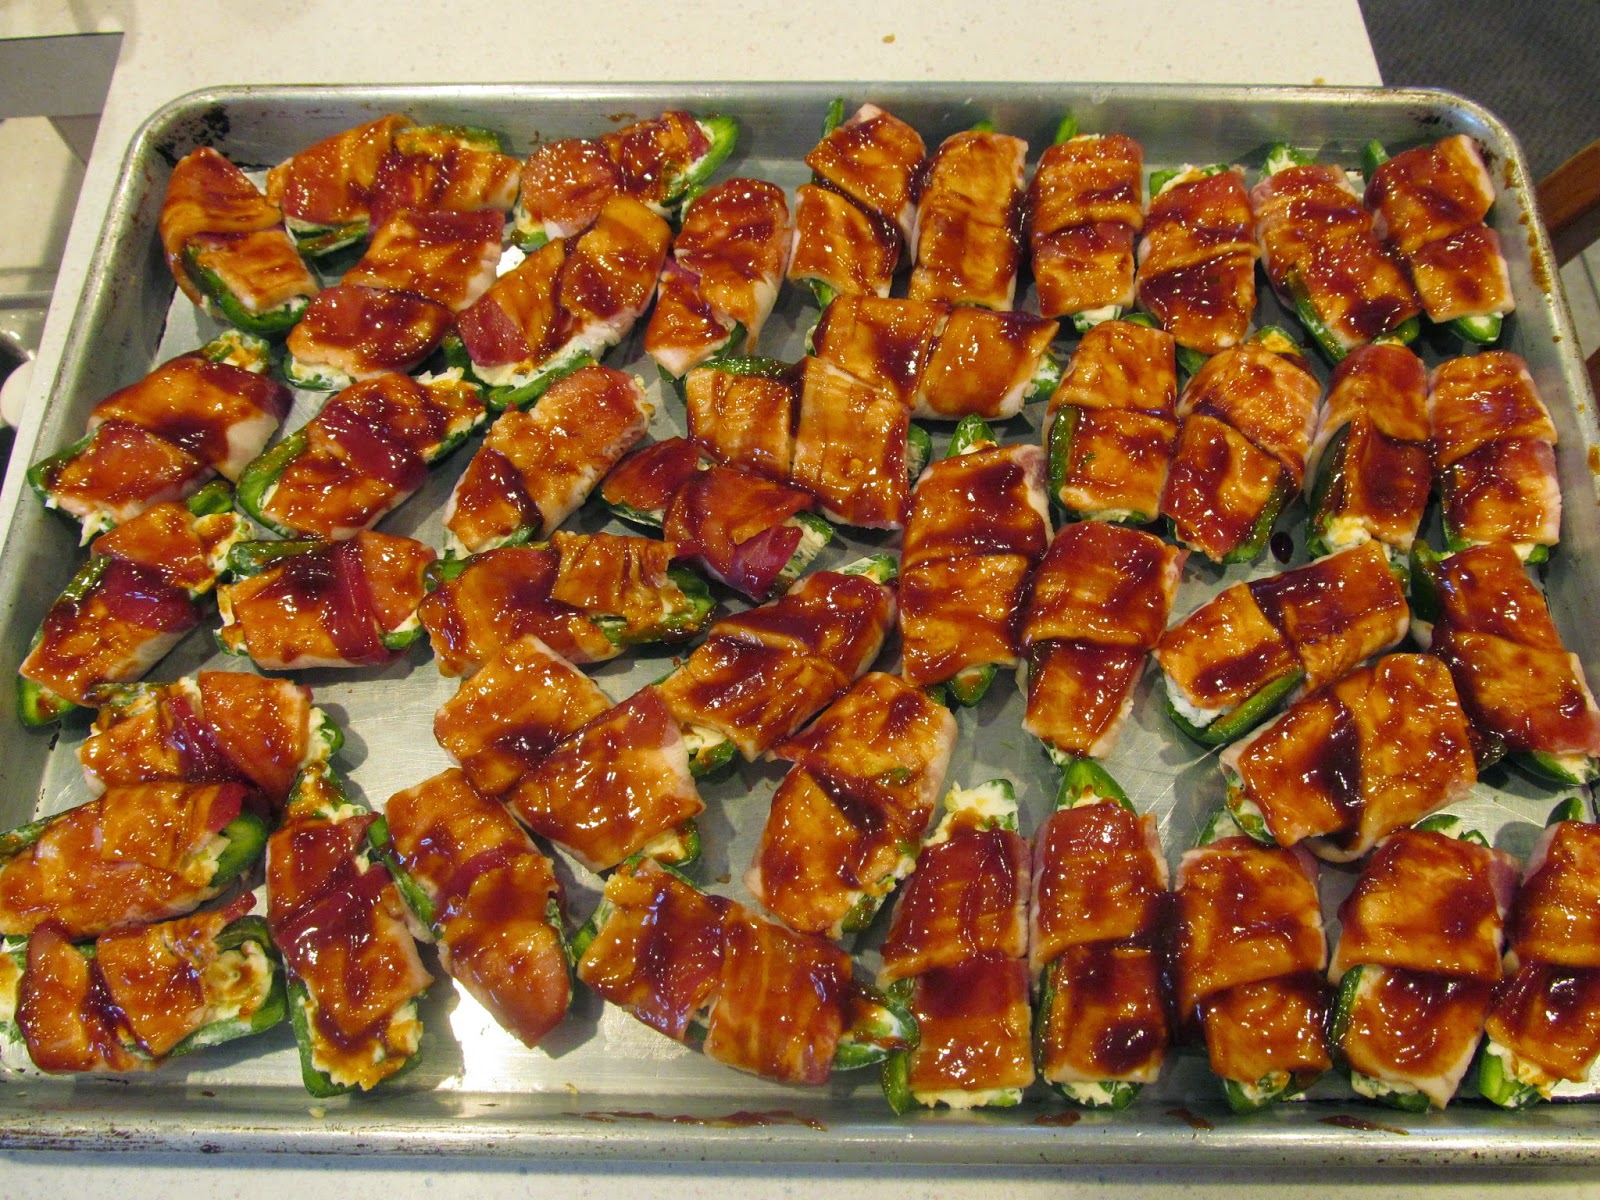 Savings for Sisters: Recipe: Bacon Wrapped Jalapenos*